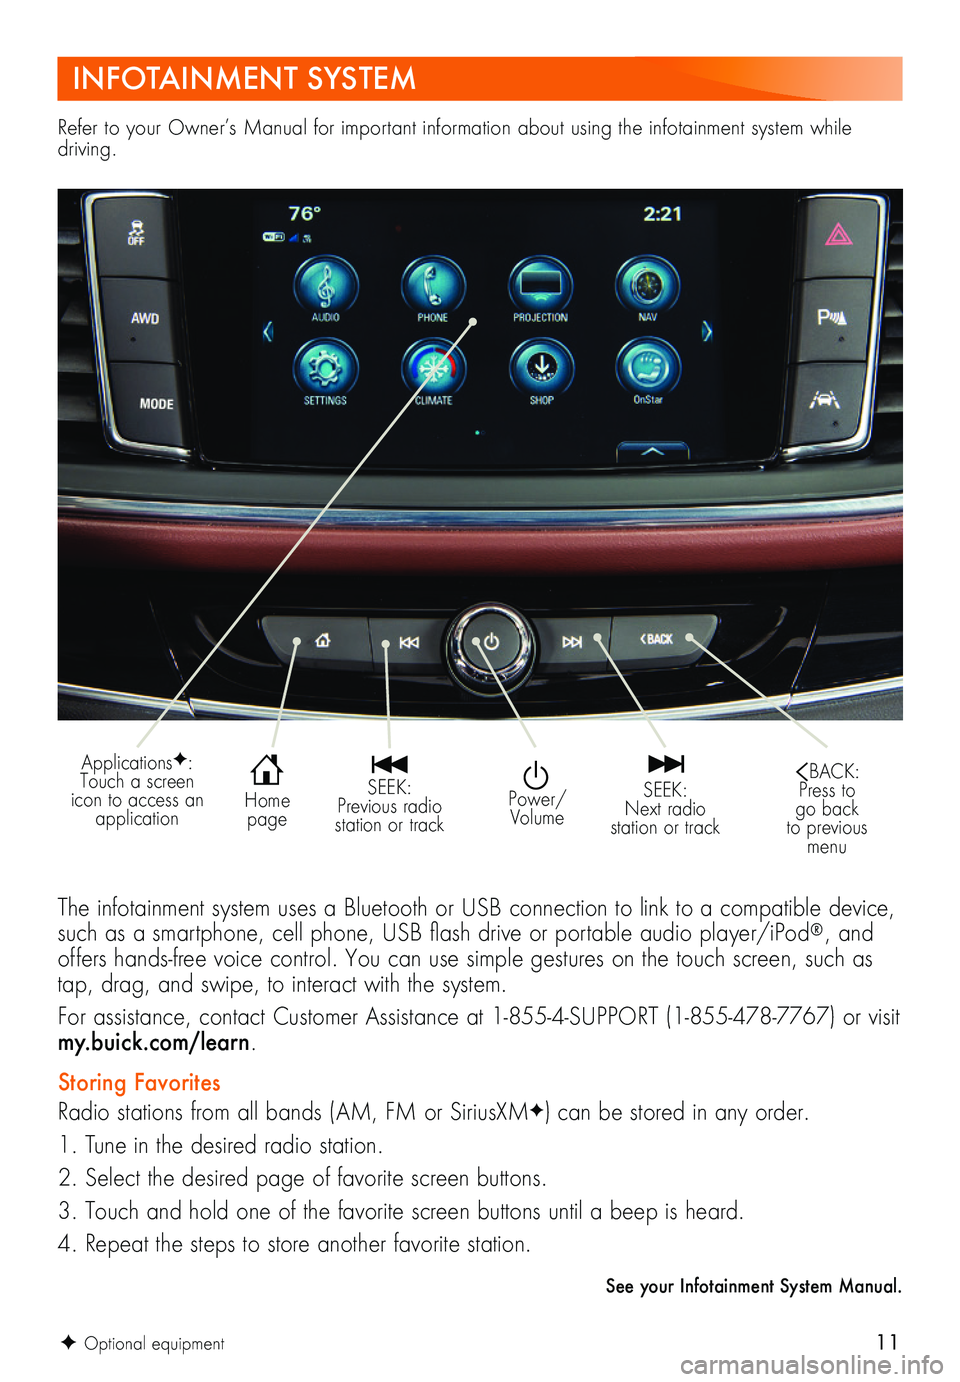 BUICK ENCLAVE 2019  Get To Know Guide 11
Refer to your Owner’s Manual for important information about using the infotainment system while driving.
INFOTAINMENT SYSTEM
The infotainment system uses a Bluetooth or USB connection to link to